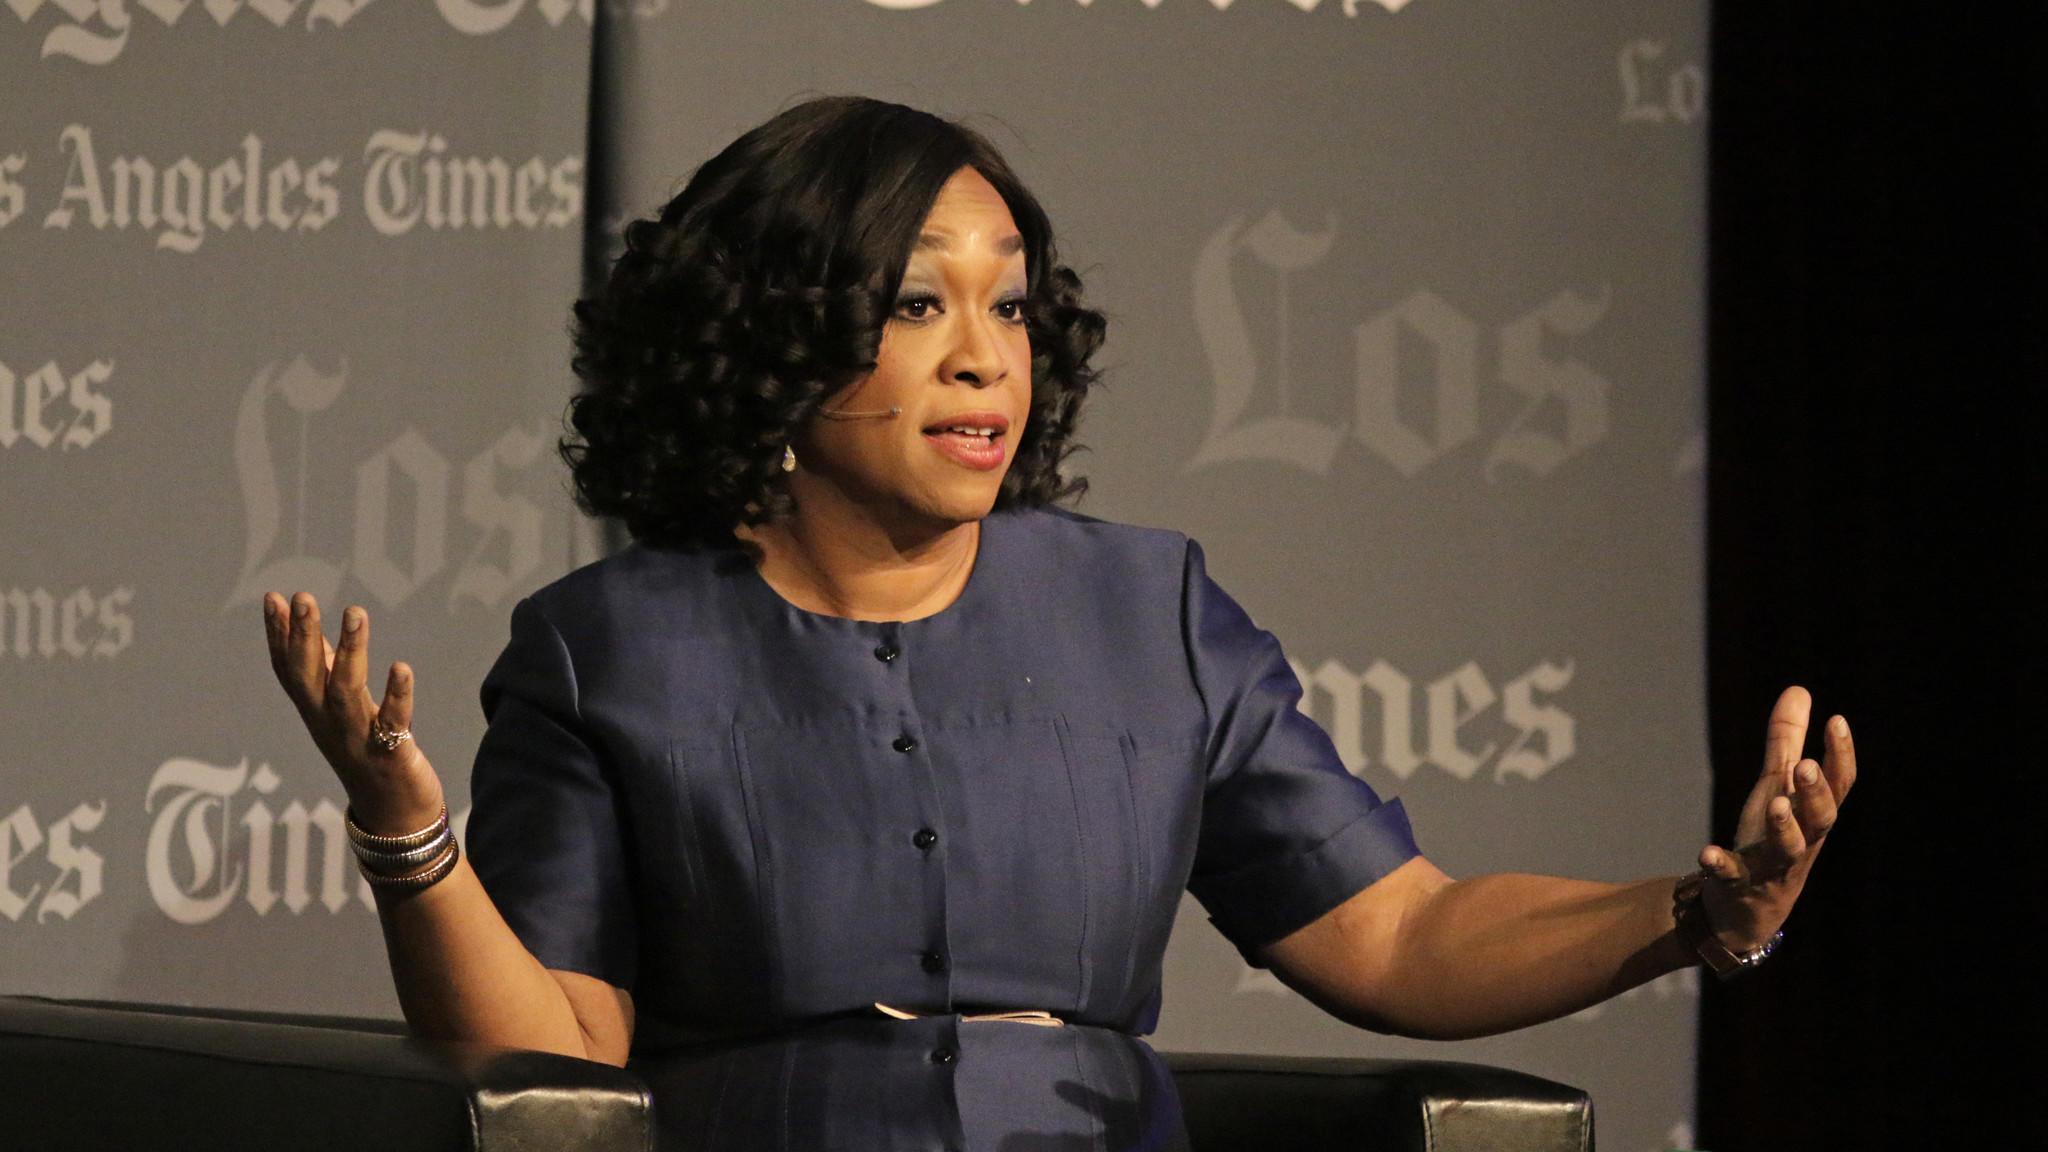 Shonda Rhimes' move to Netflix from ABC could spark war for talent